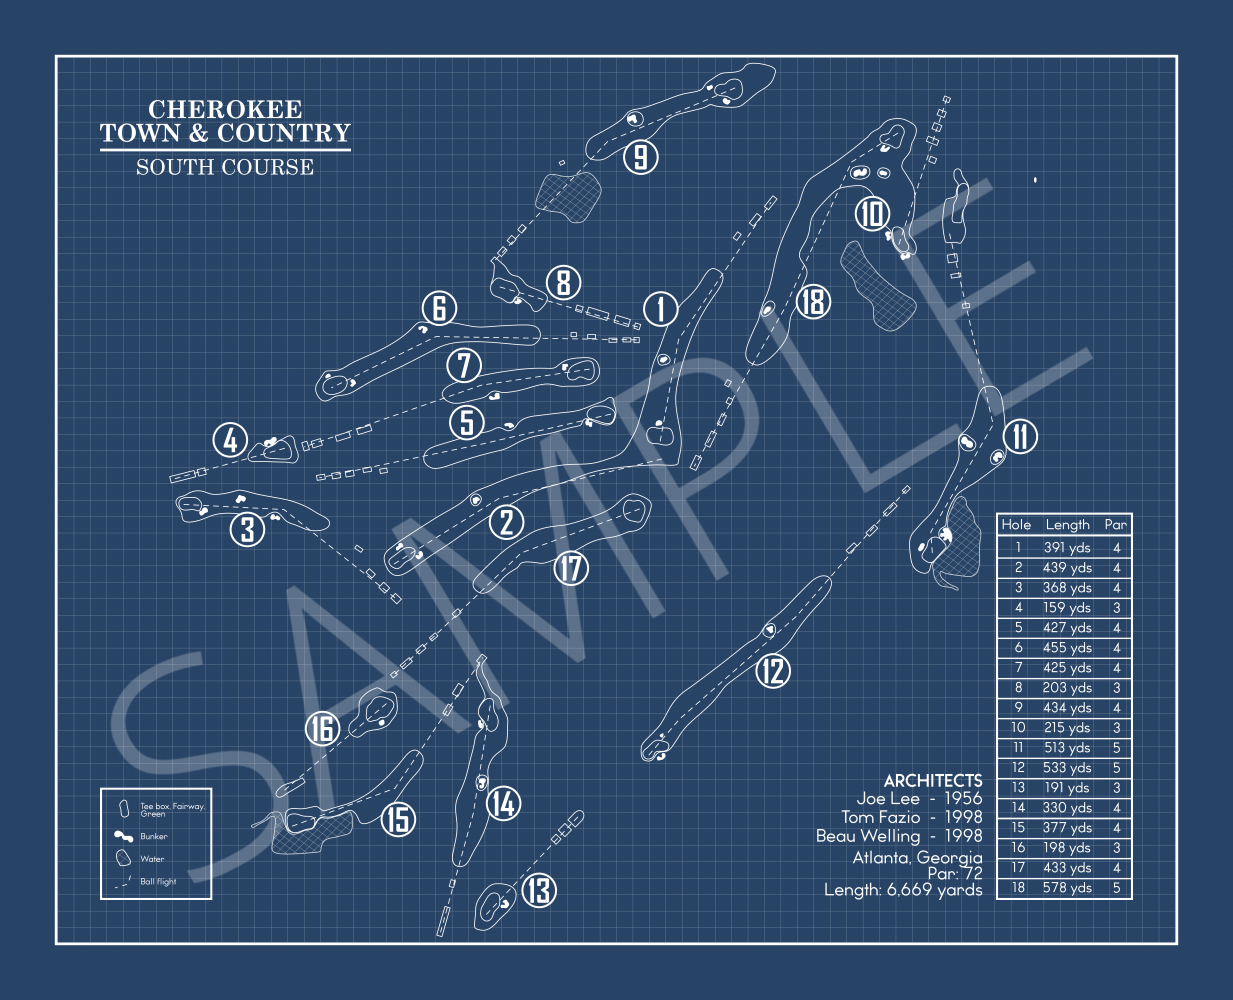 Cherokee Town & Country Club South Course Blueprint (Print)